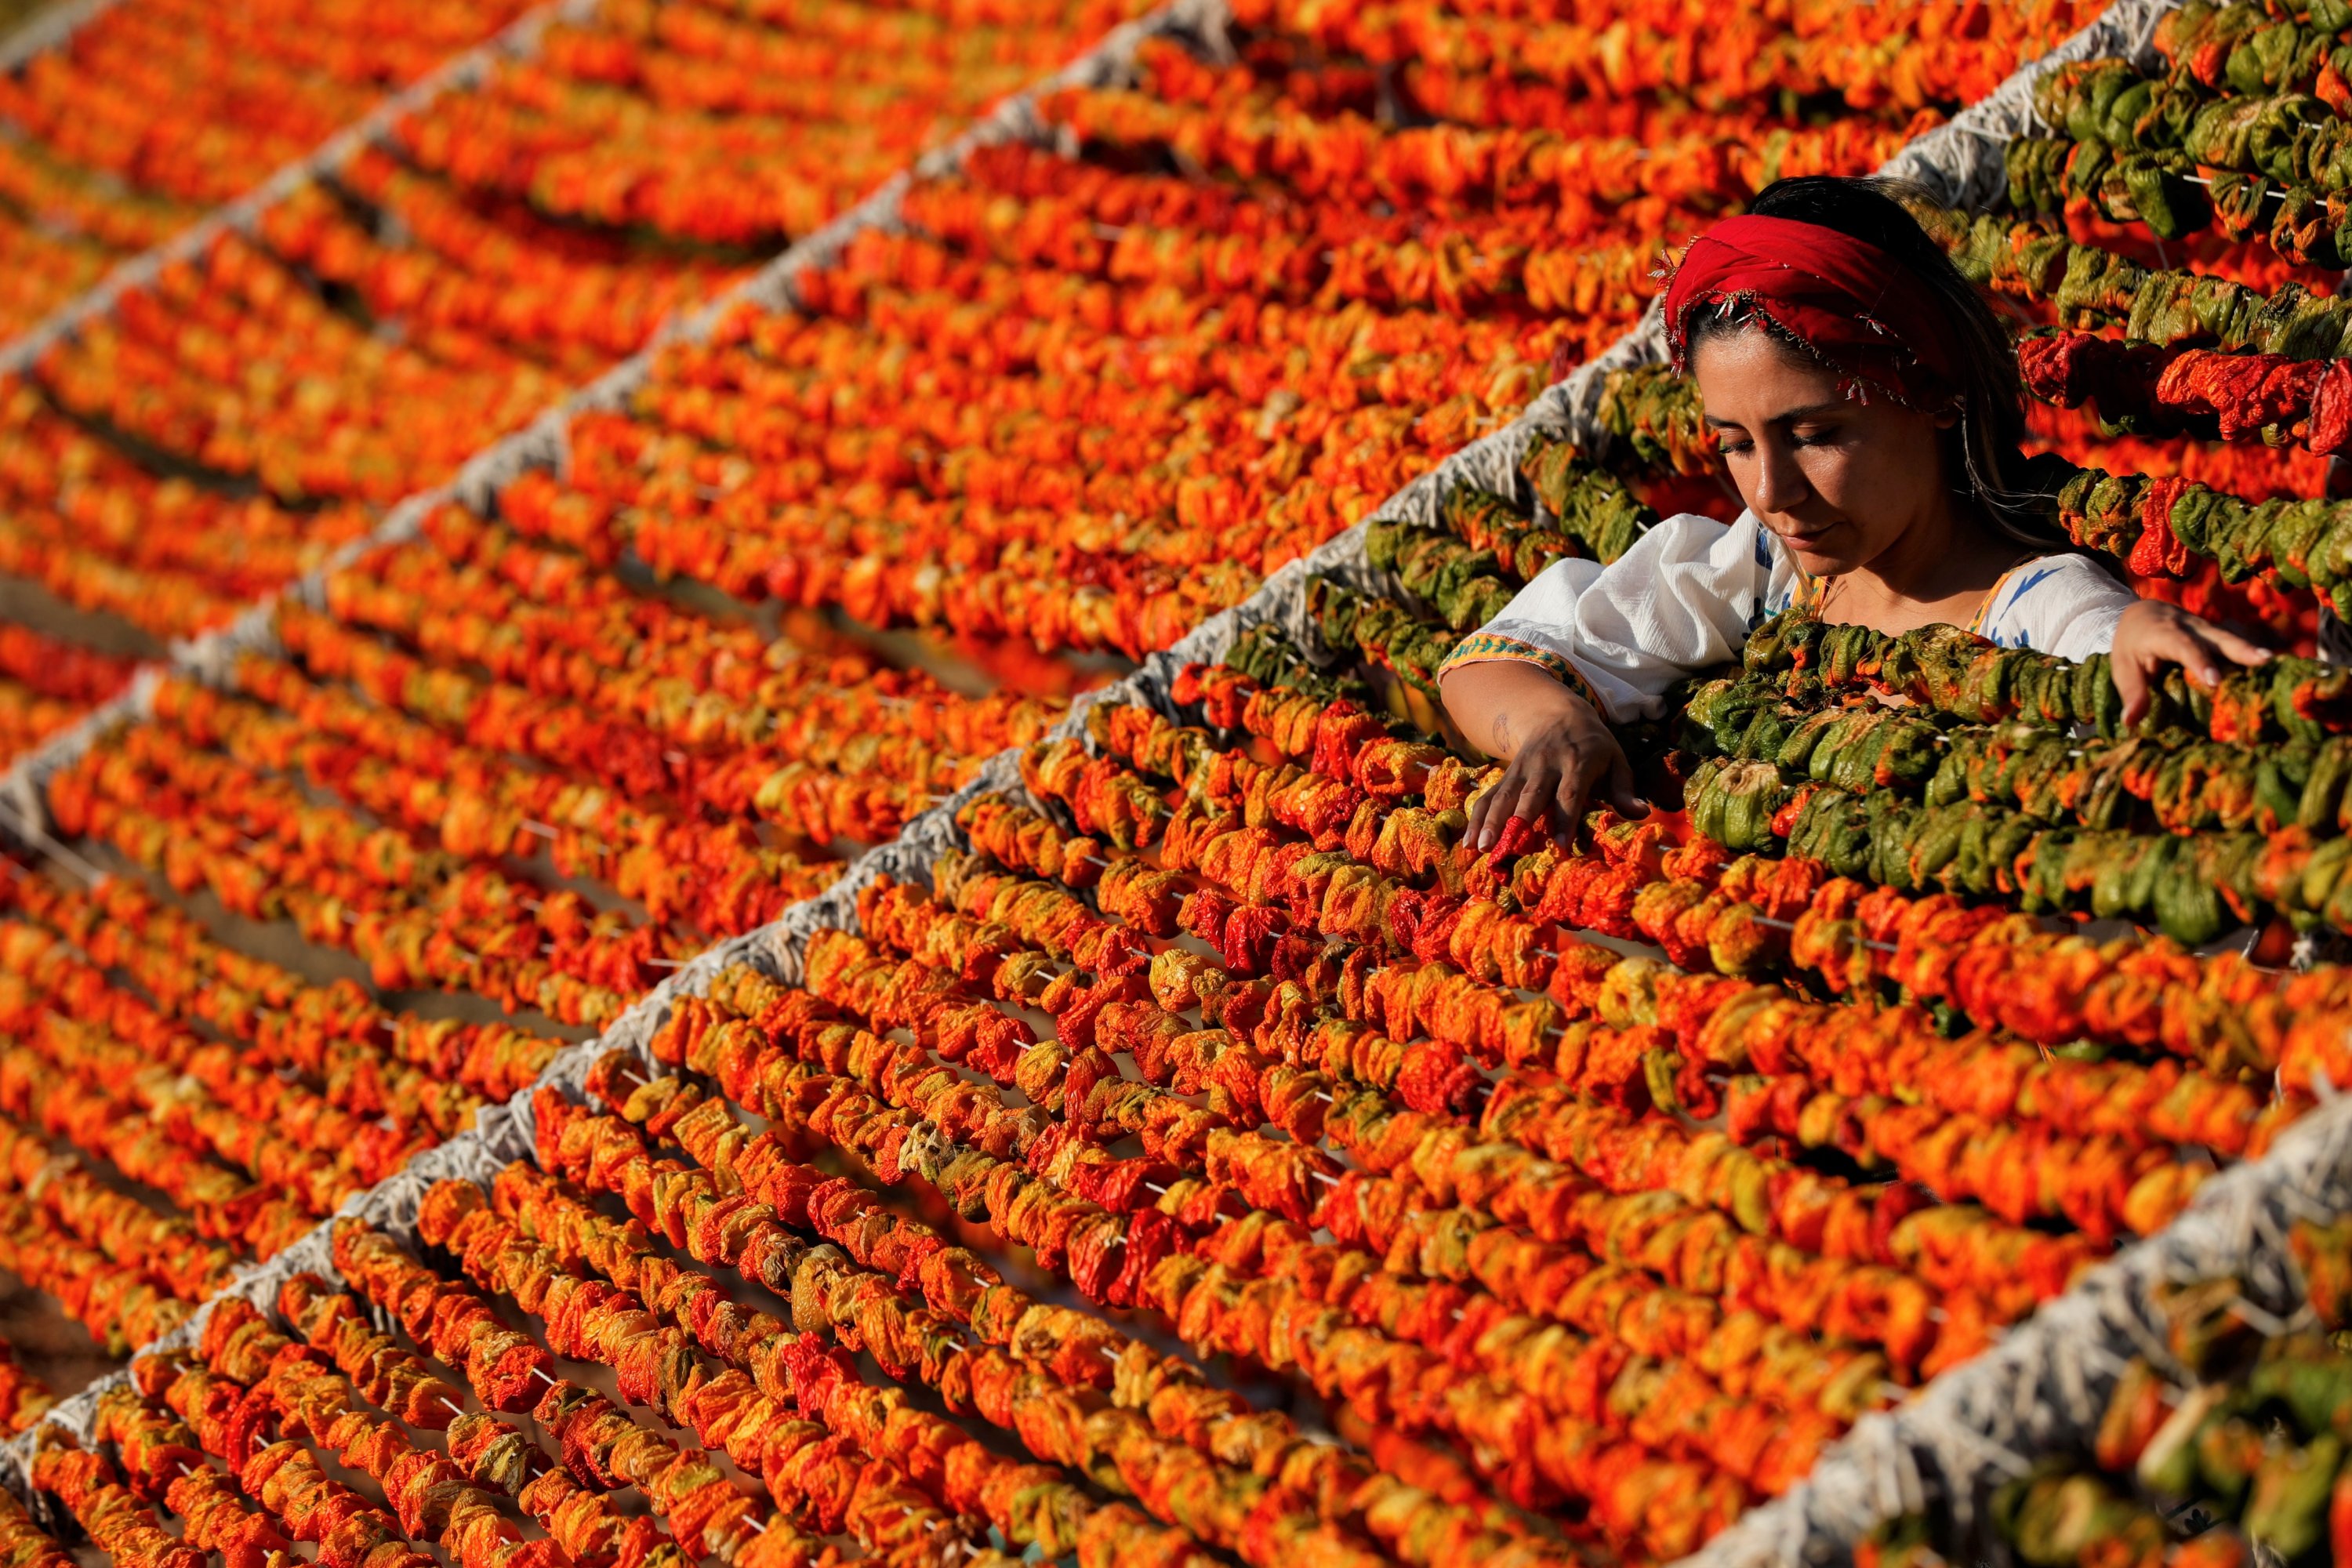 A woman examines produce drying in the sun in southeastern Gaziantep province, Turkey, July 22, 2020. (AA Photo)